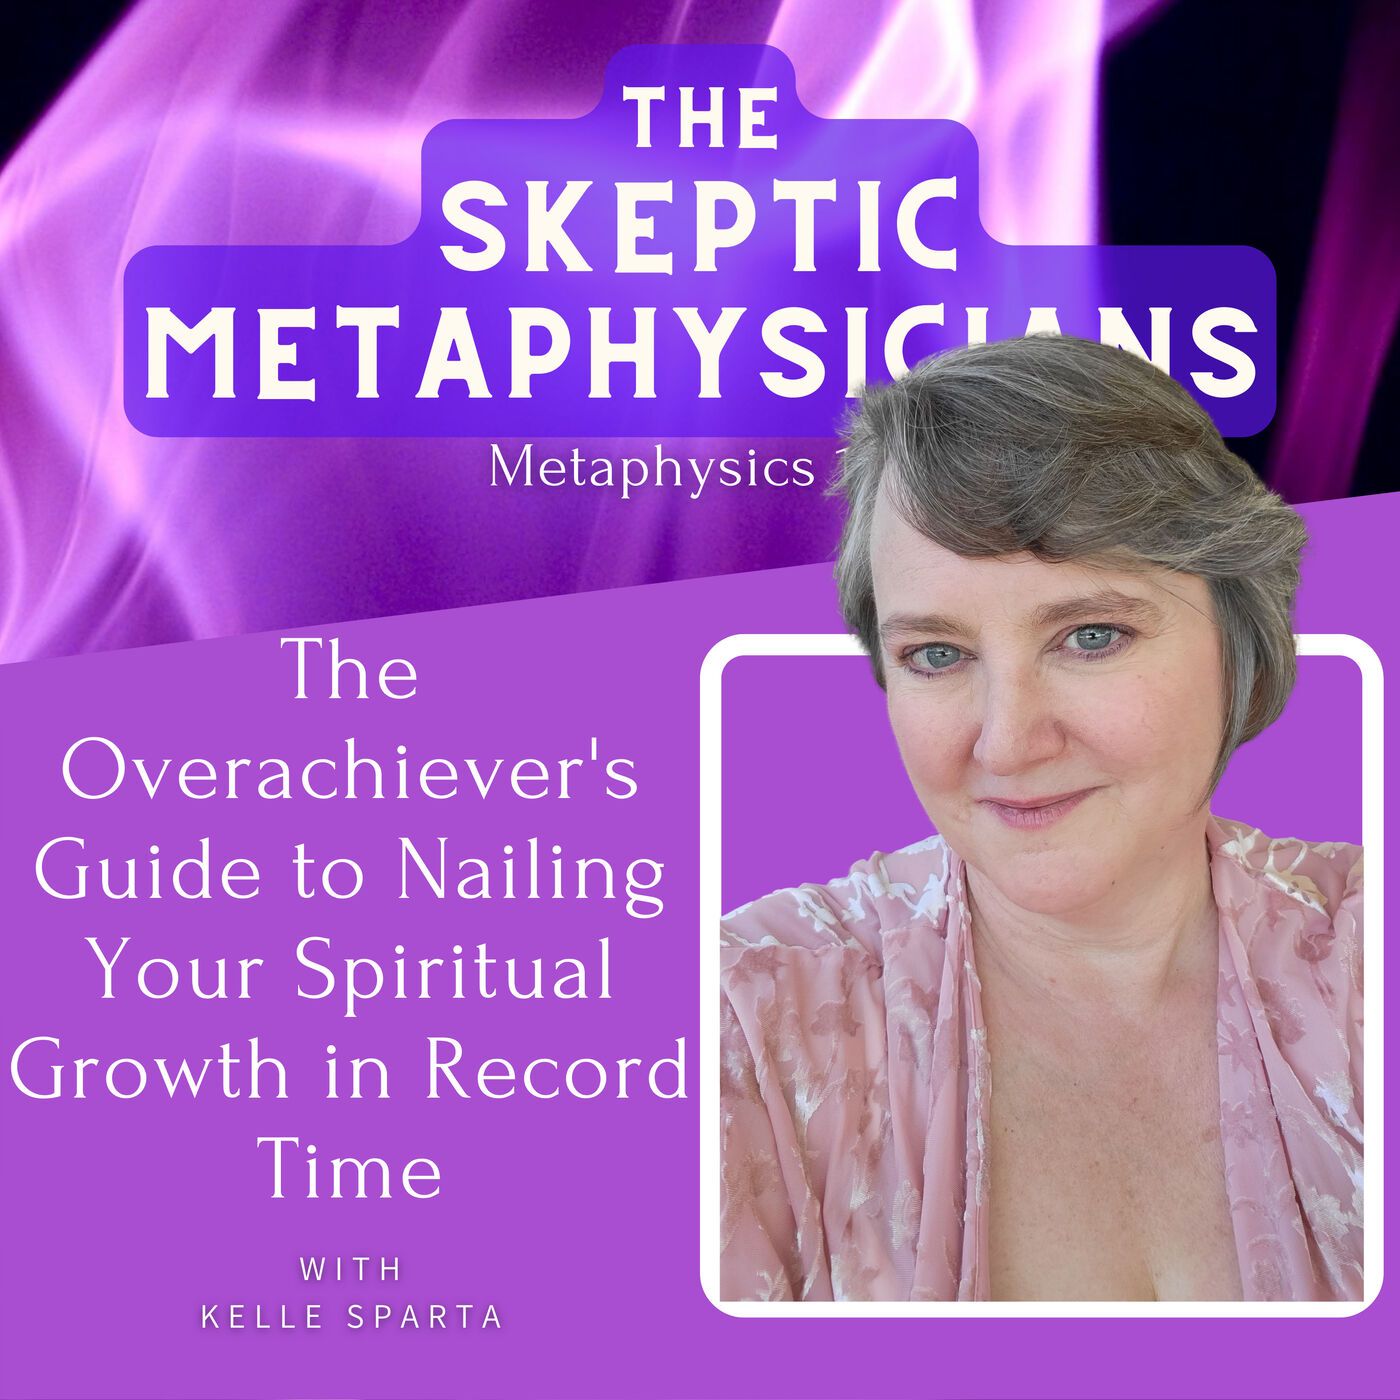 The Overachiever's Guide to Nailing Your Spiritual Growth in Record Time | Kelle Sparta Image